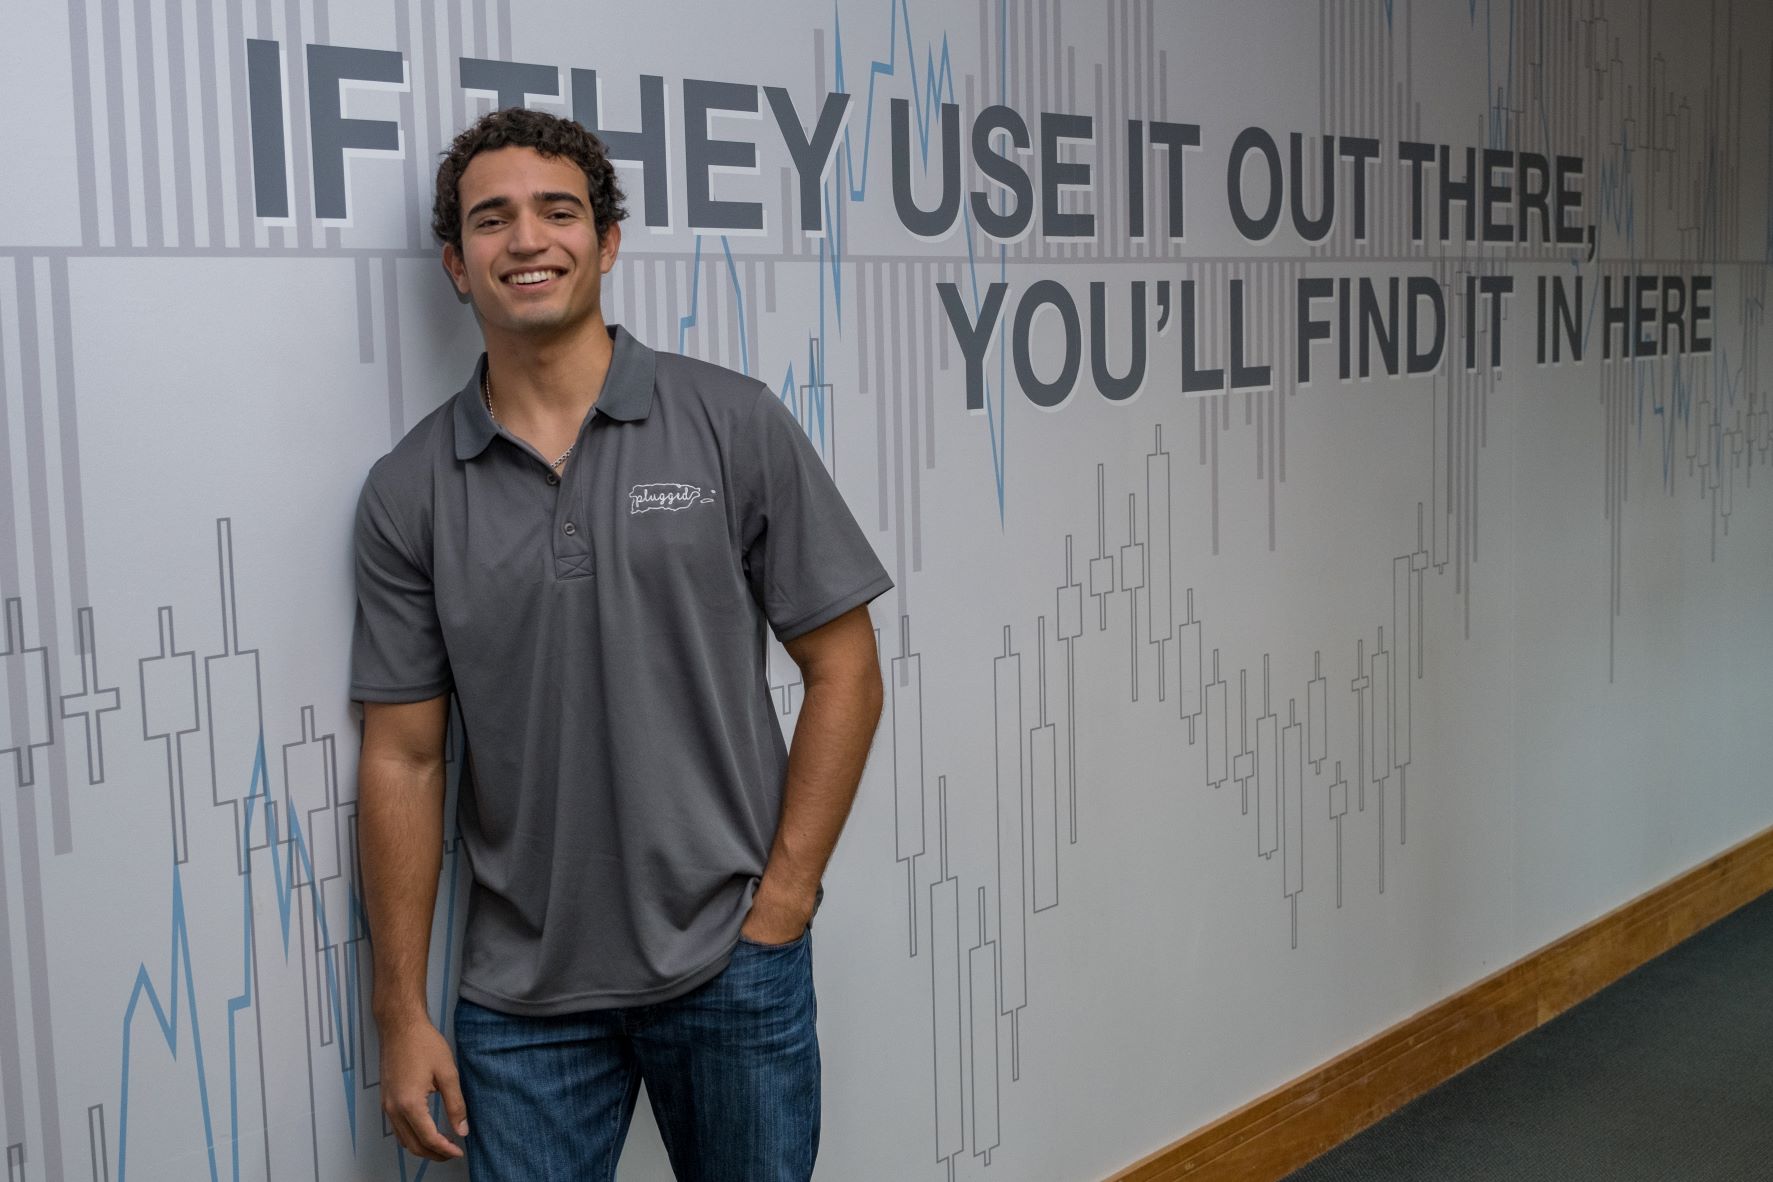 Bentley student Gabriel San Miguel leaning against wall and smiling